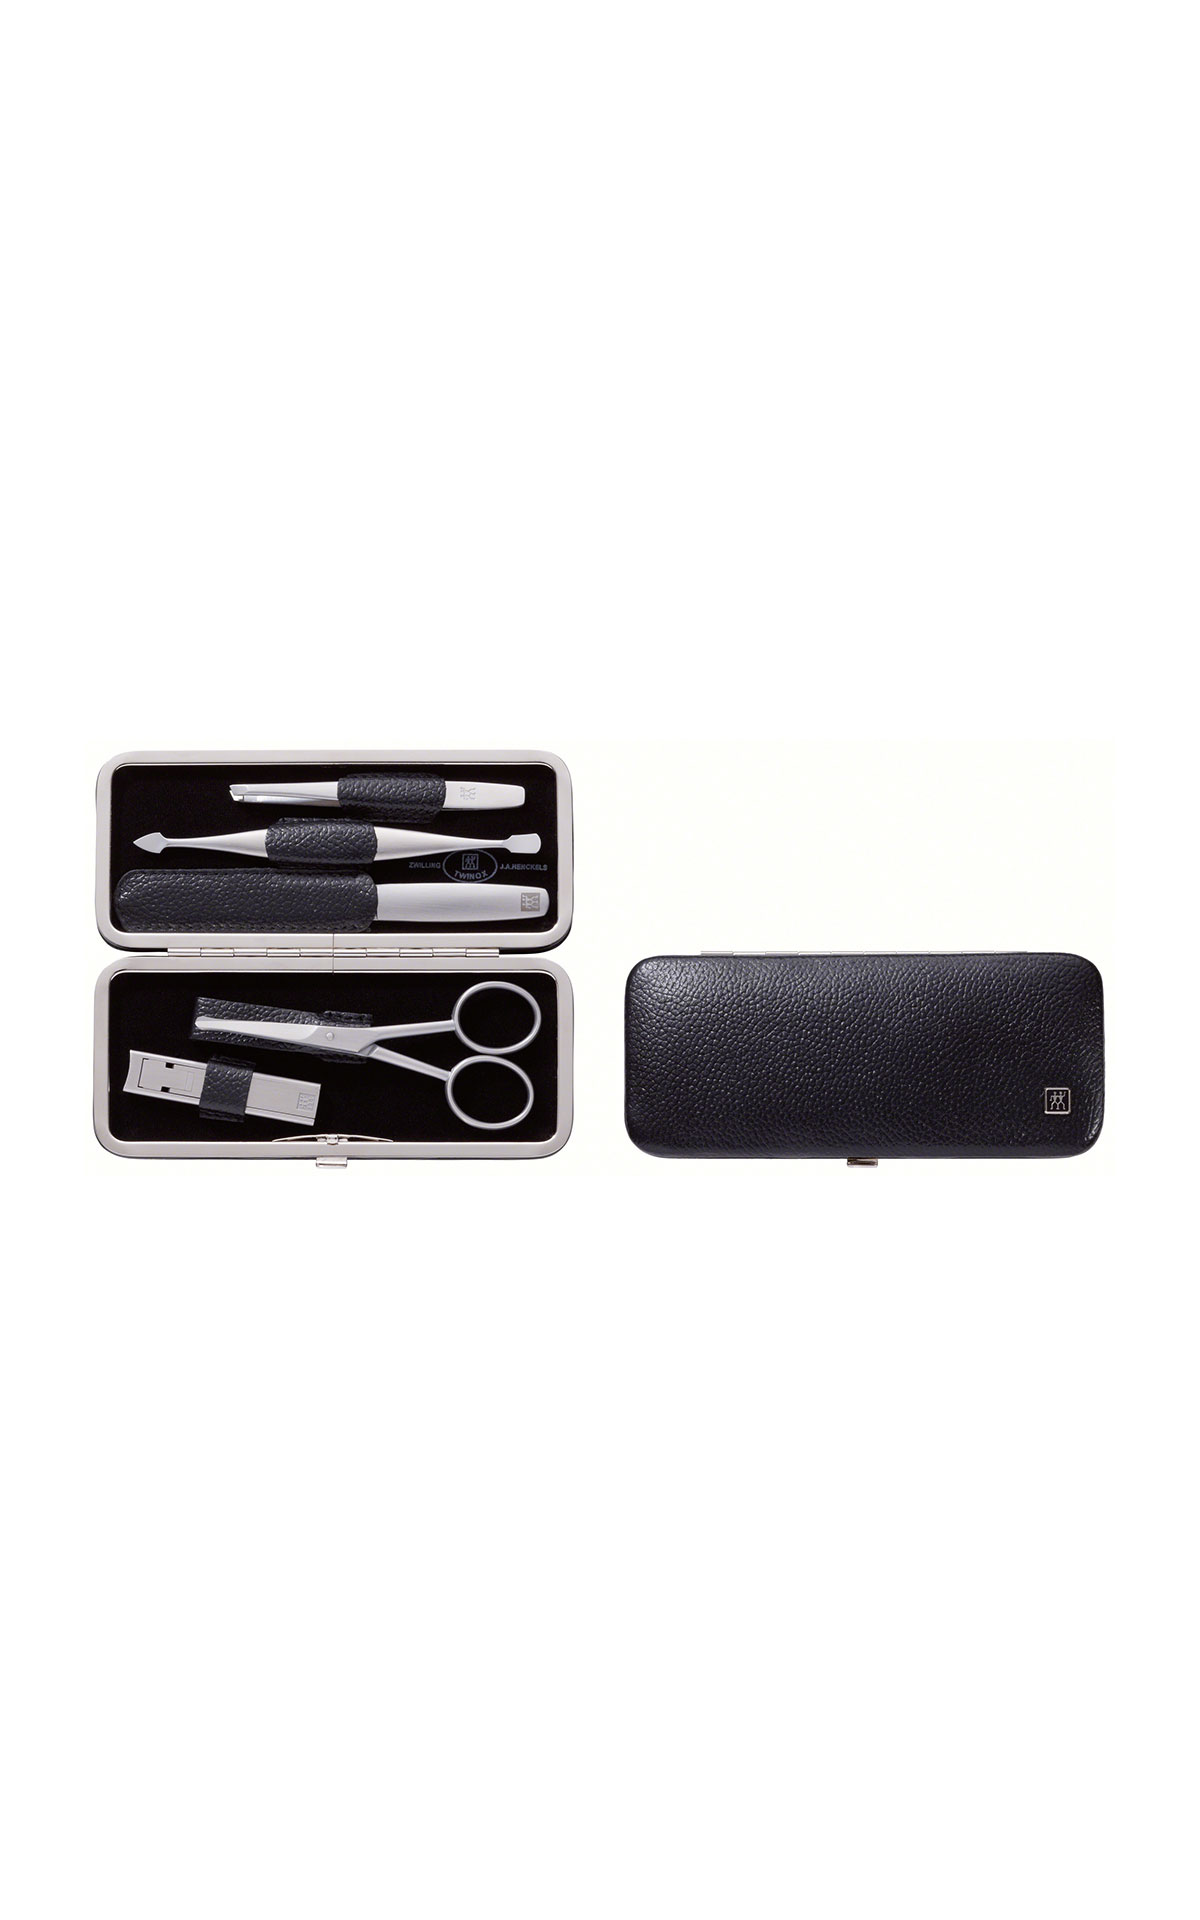 Zwilling Manicure set from Bicester Village